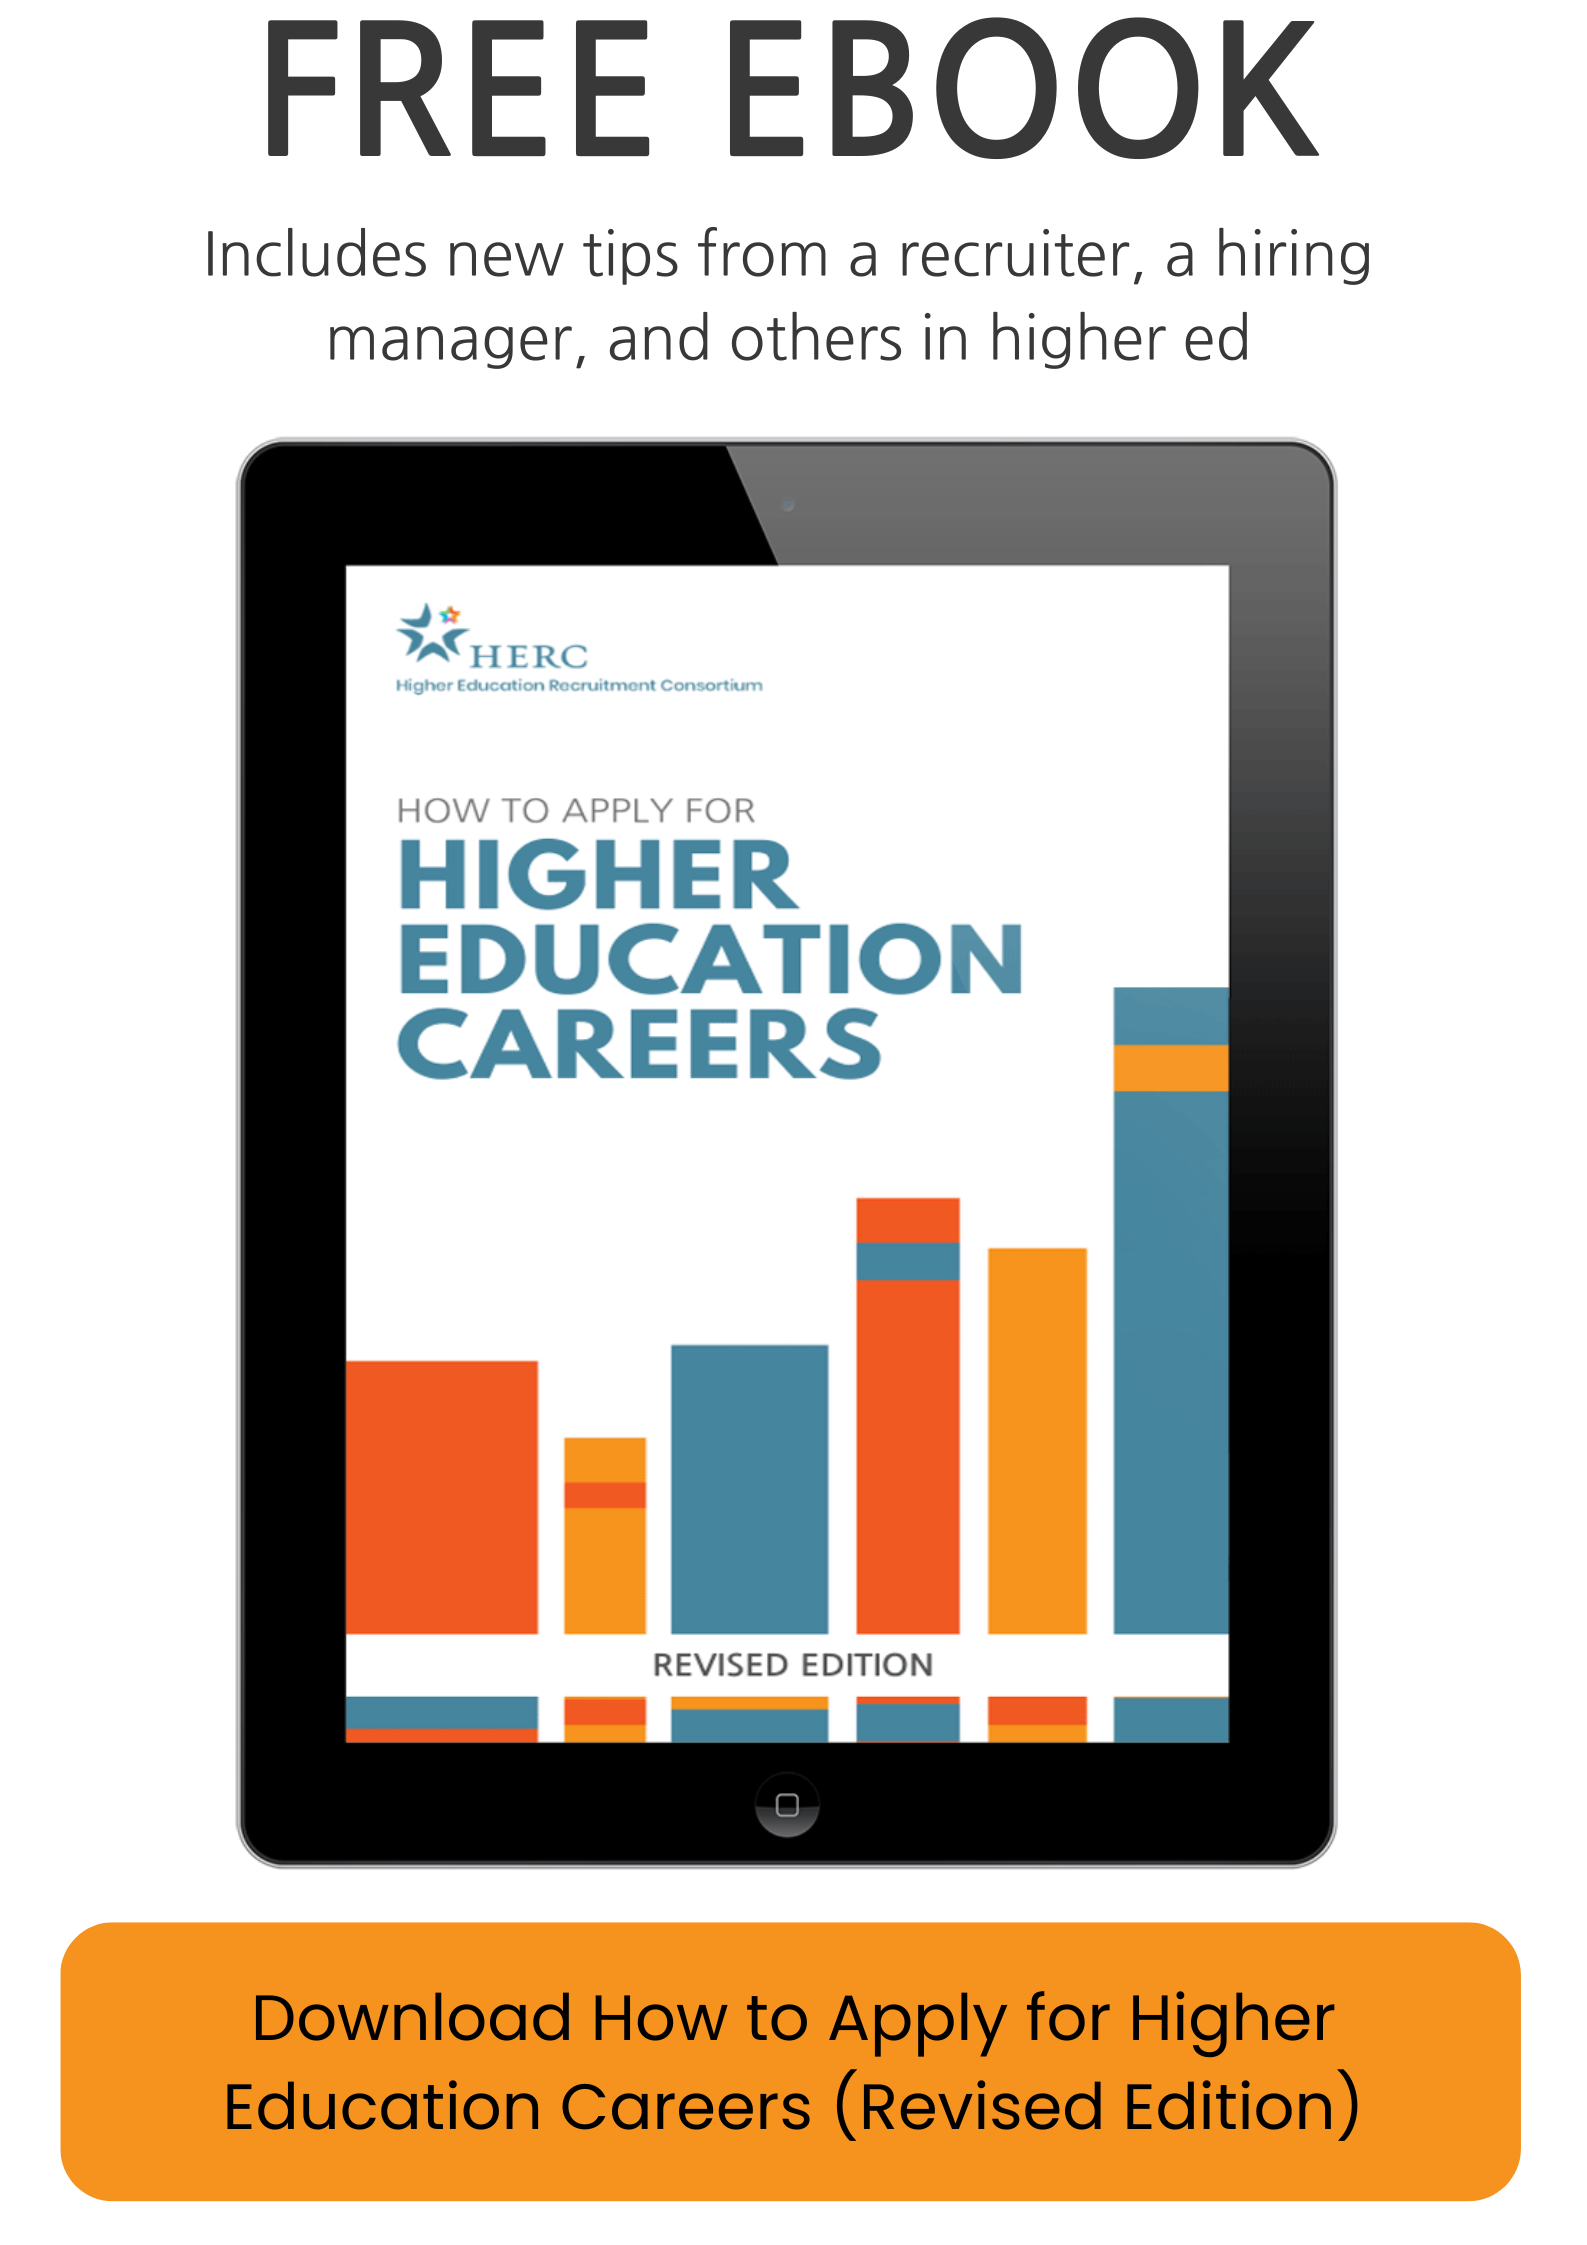 Download HERC ebook - How to Apply for Higher Education Careers